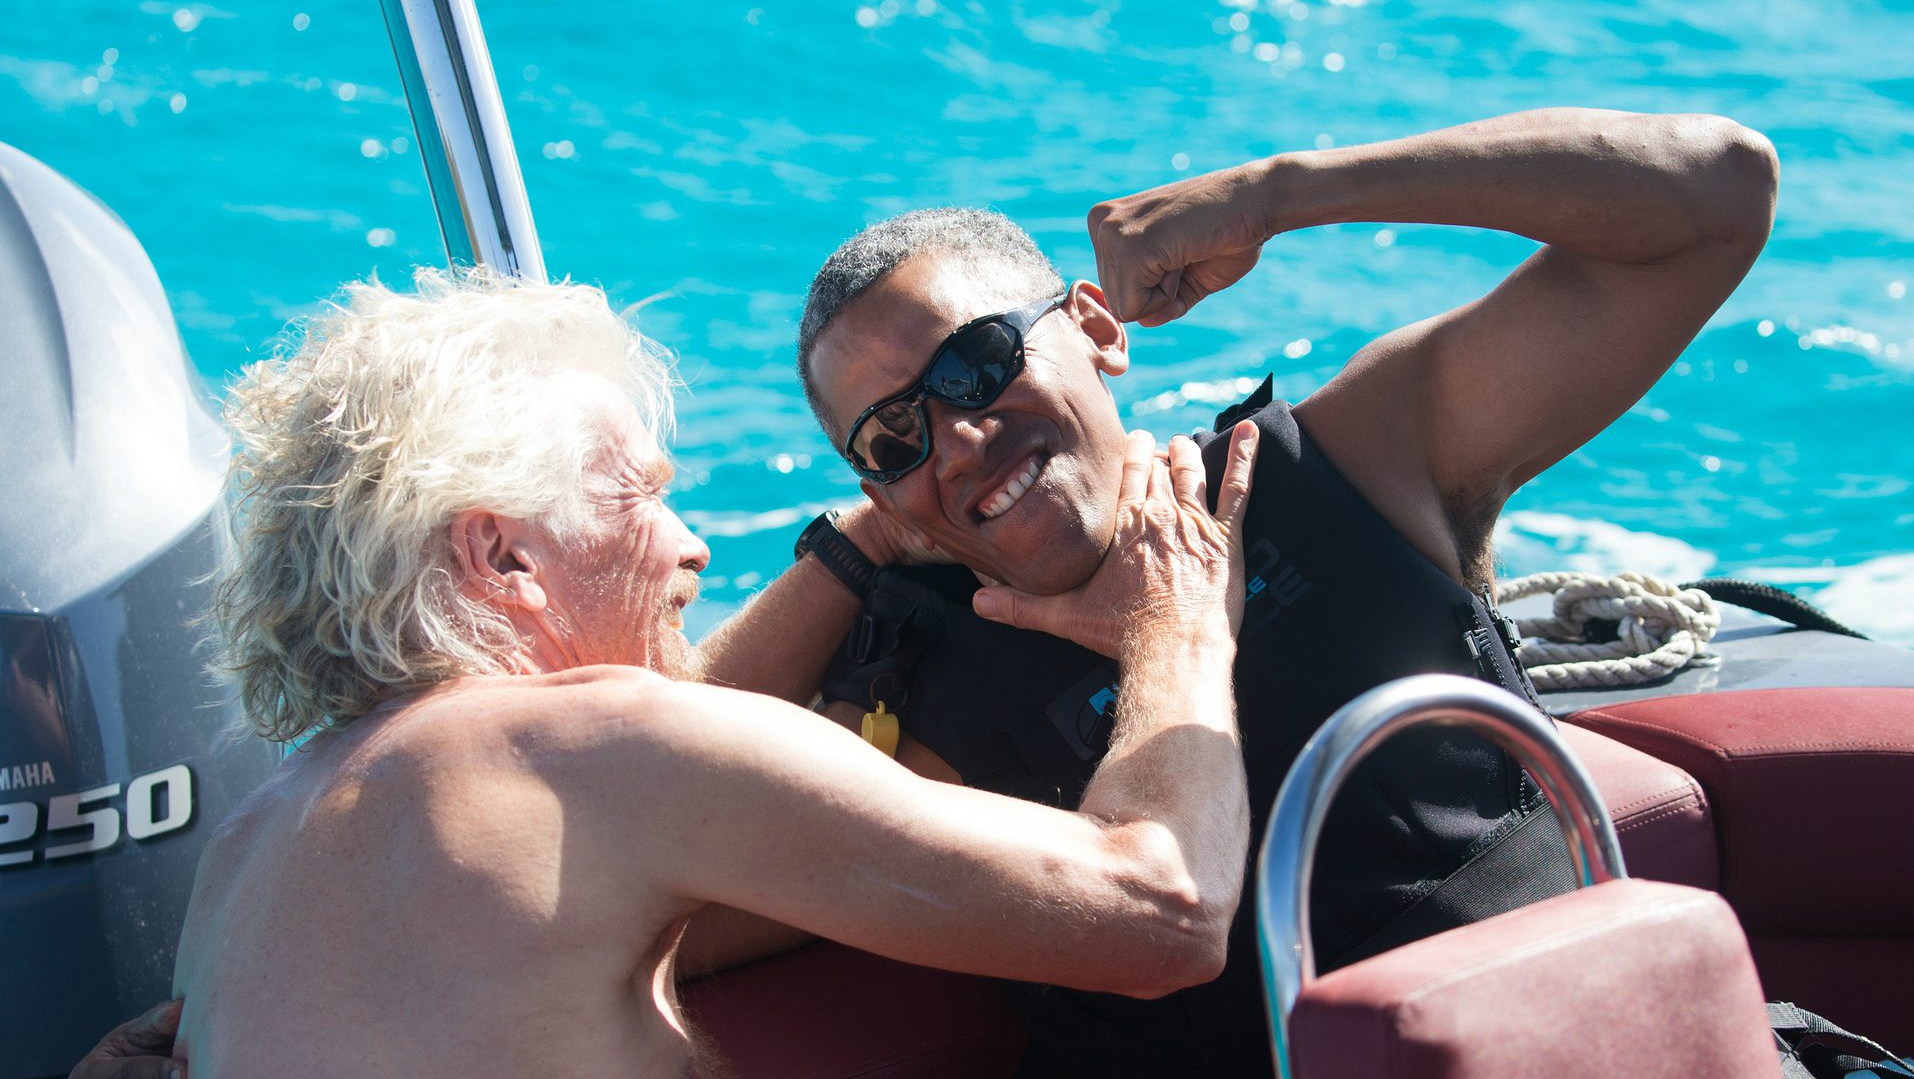 Sir Richard Branson jokes with Barack Obama while on holiday in the British Virgin Islands